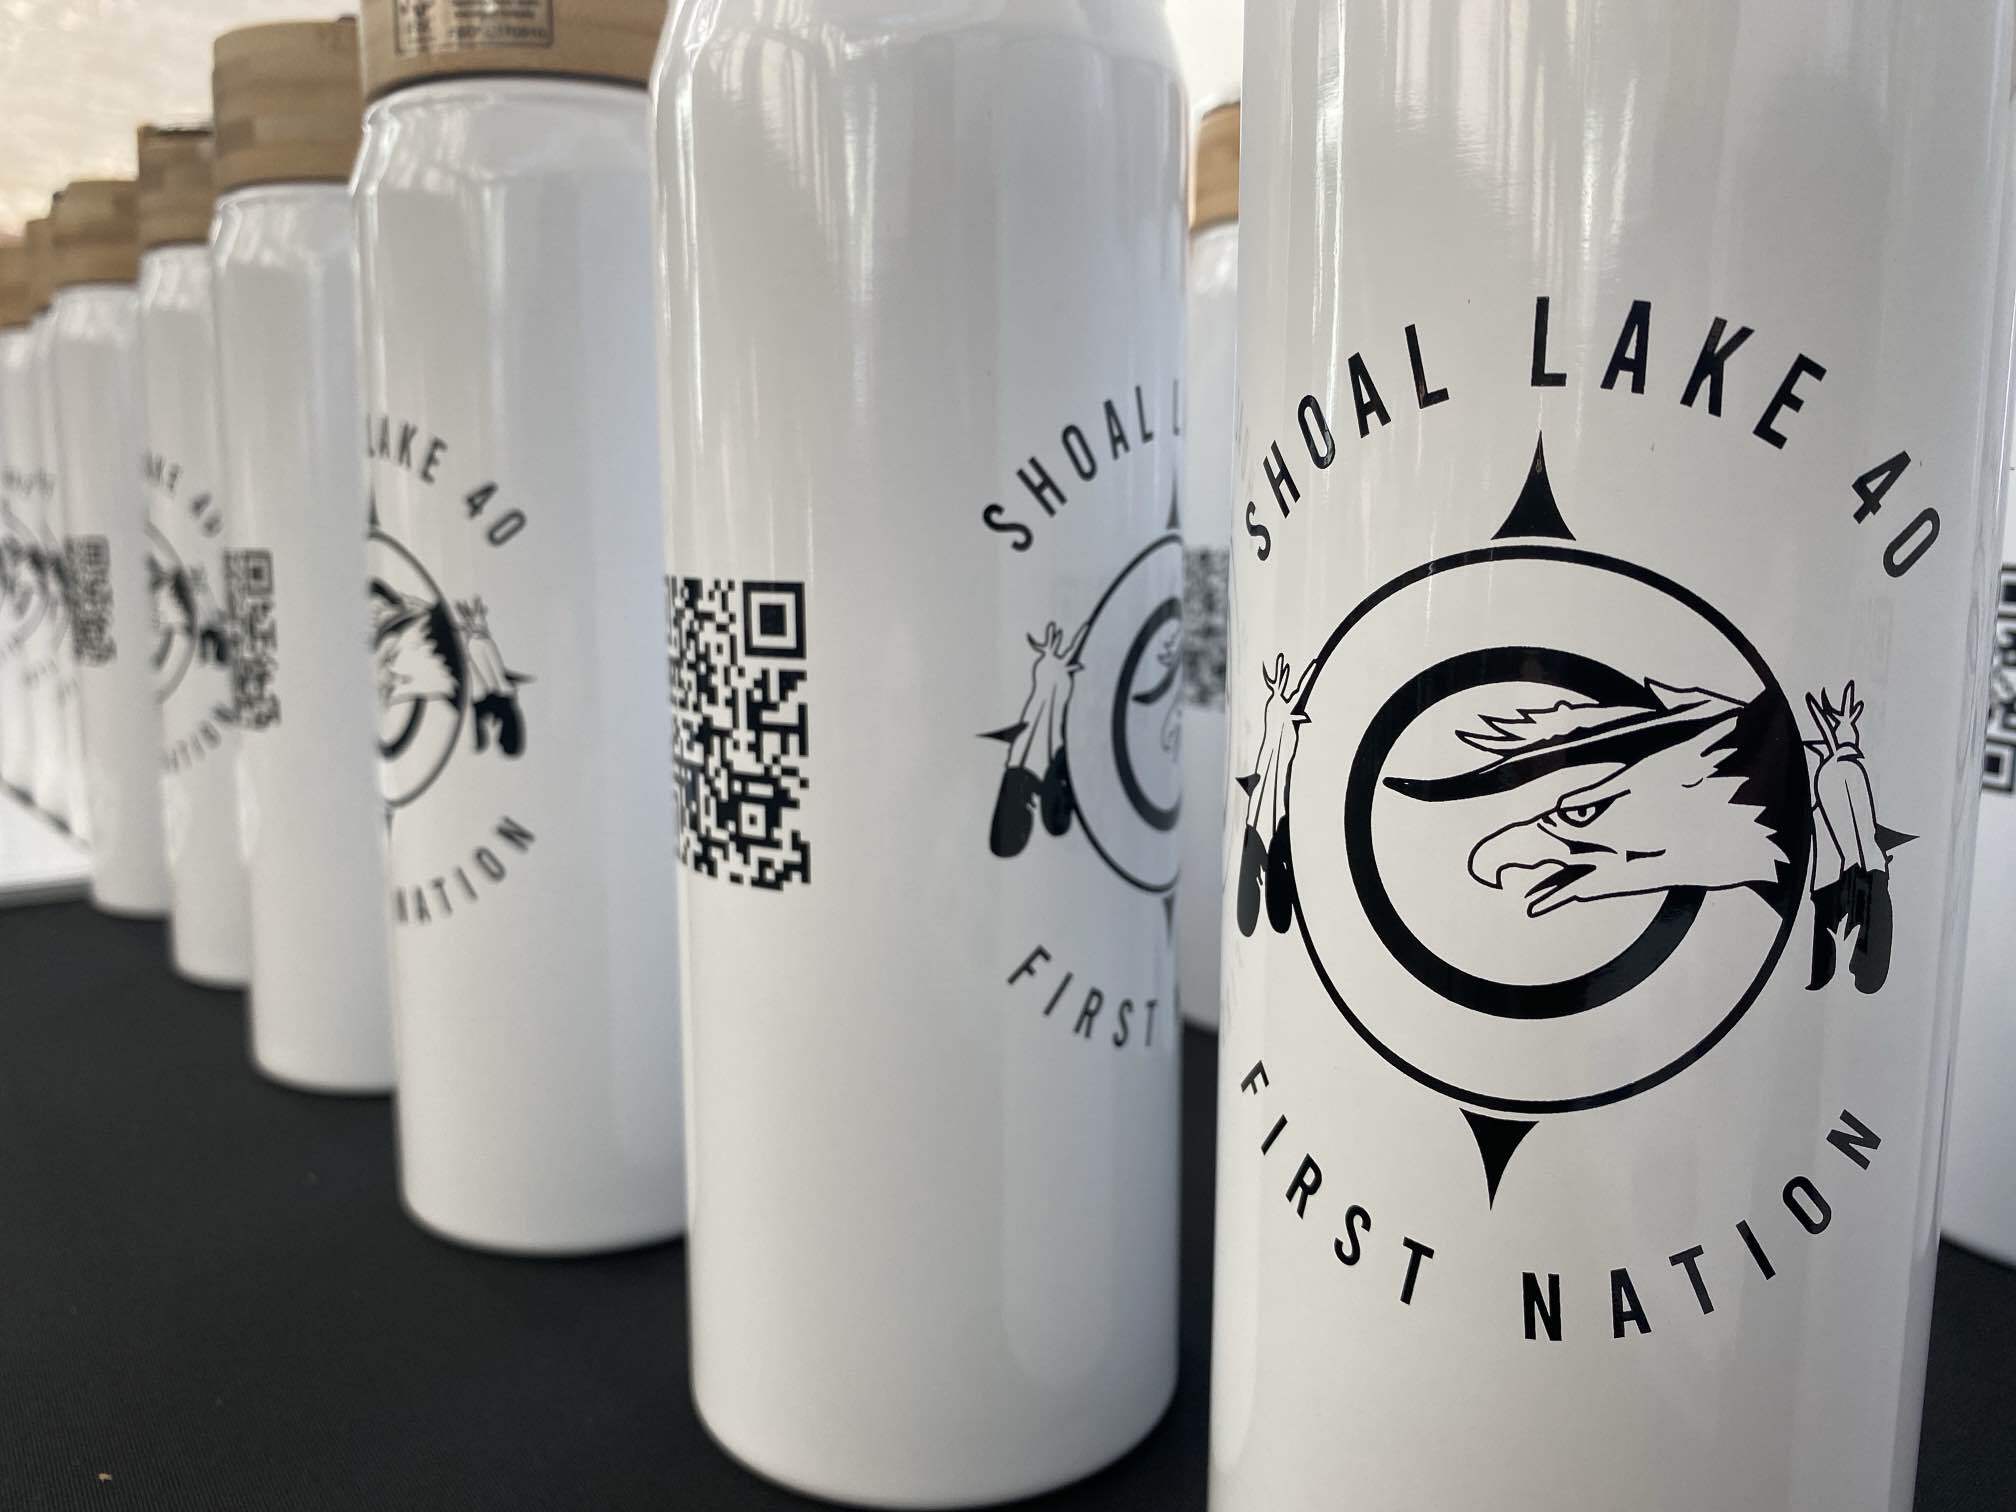 Students launch Shoal Lake 40 First Nation merch line on World Water Day